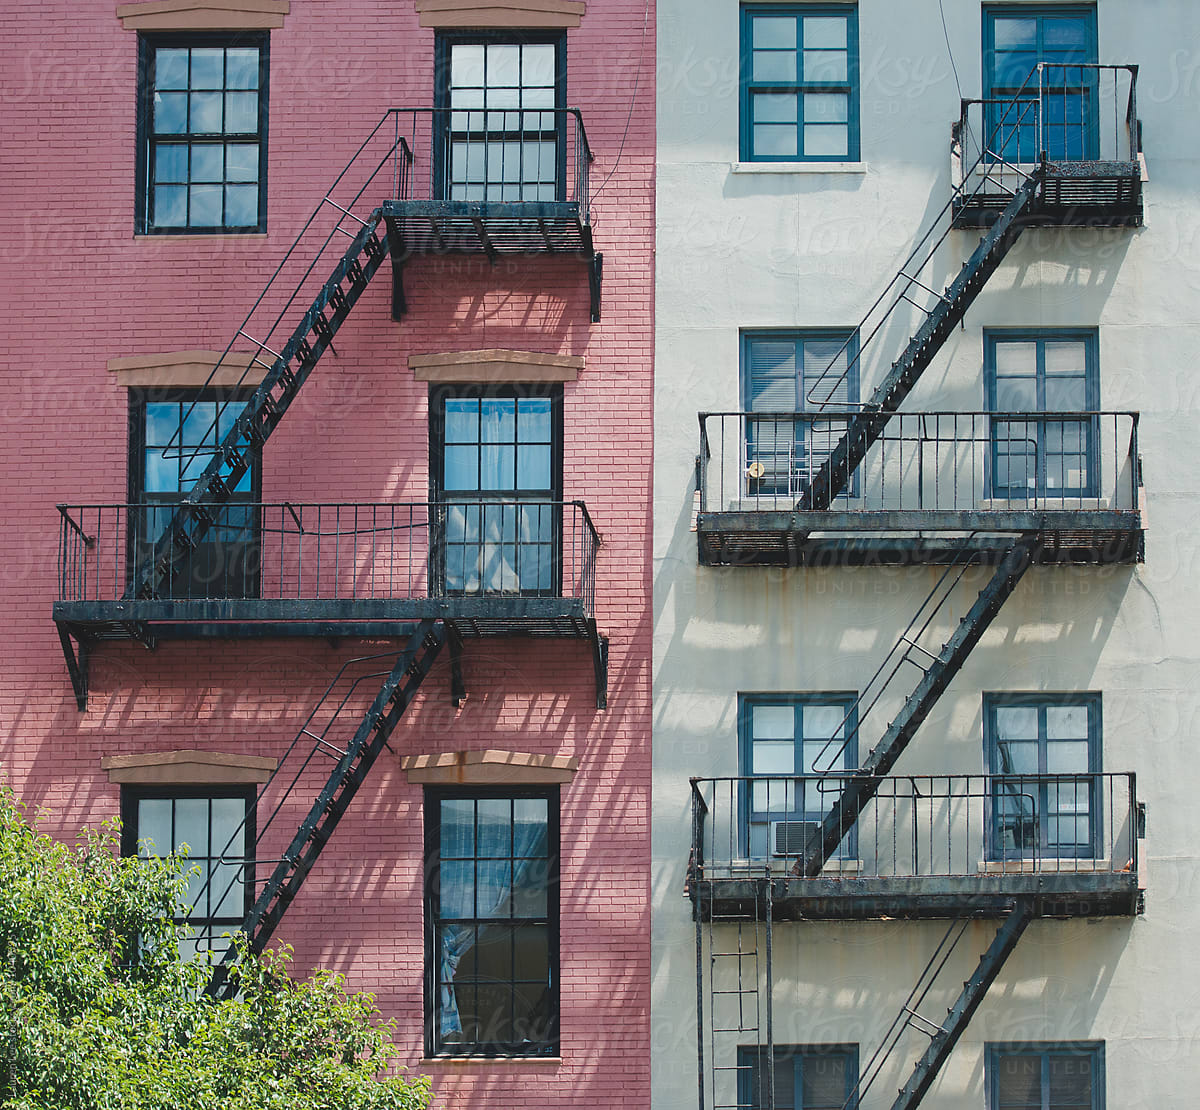 Apartment building and fire escapes in the city